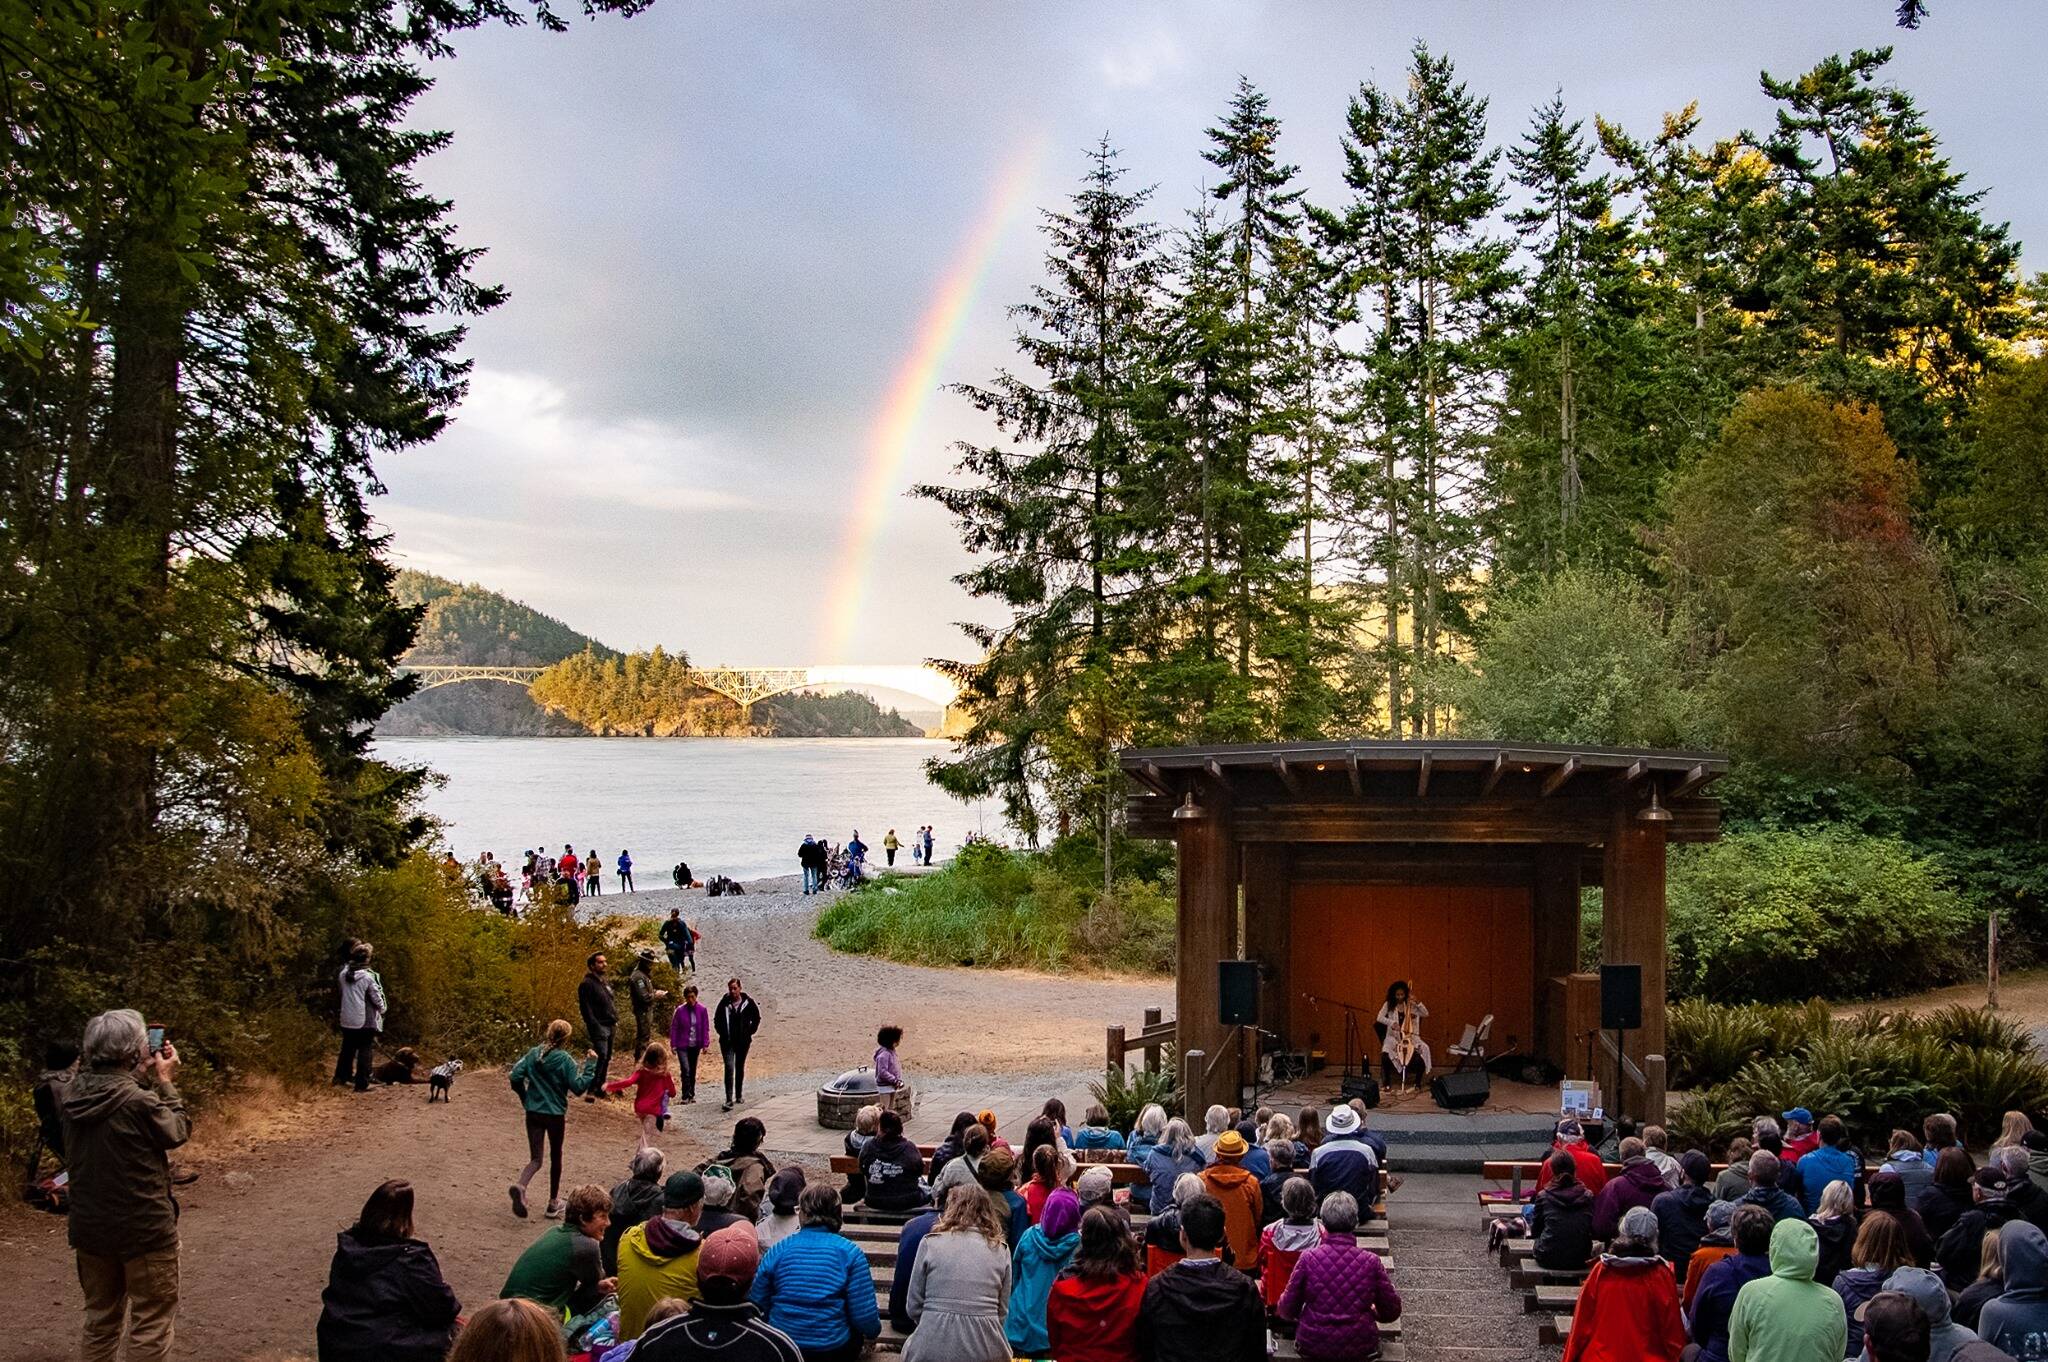 The amphitheater at Deception Pass during last year's concert series. (Photo provided by Deception Pass Park Foundation Facebook page.)